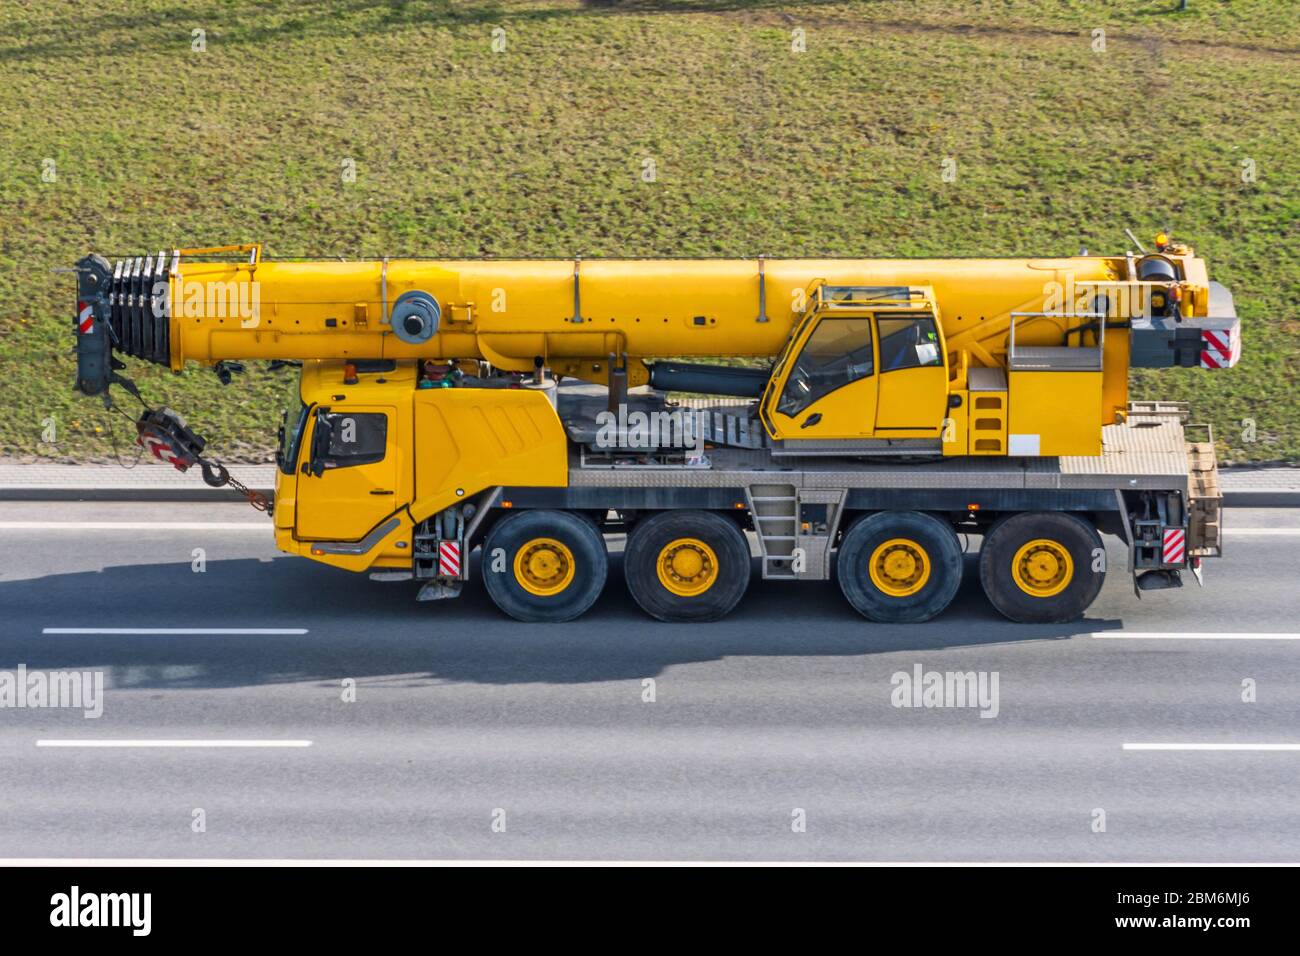 Heavy mobile crane with folding boom construction rides on a city